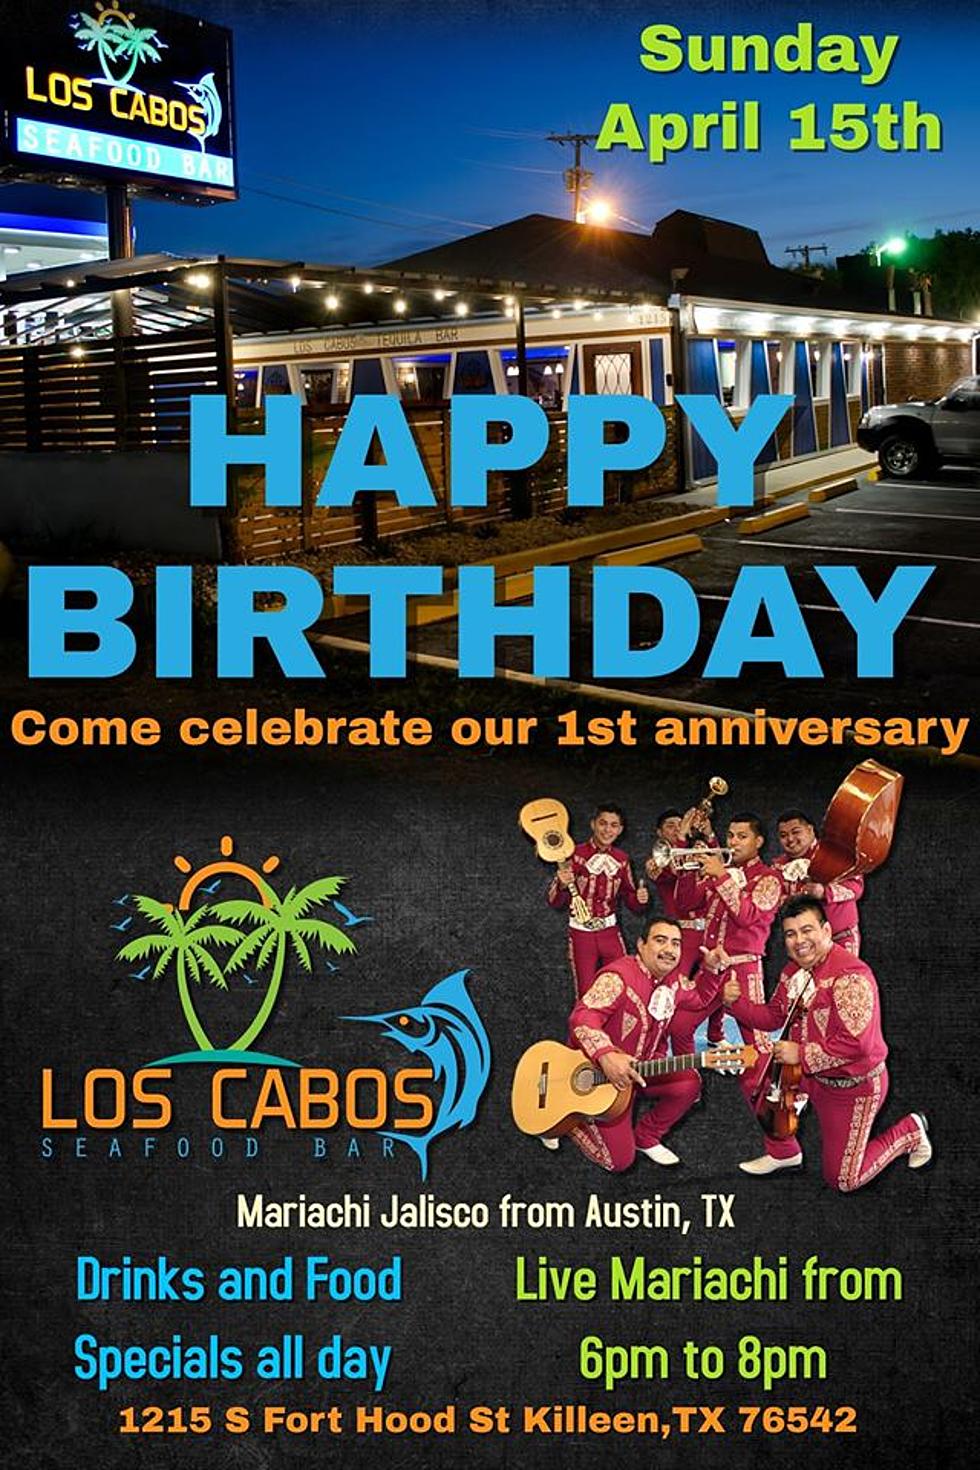 Los Cabos Sea Food Bar Invites You To Celebrate One Year Anniversary